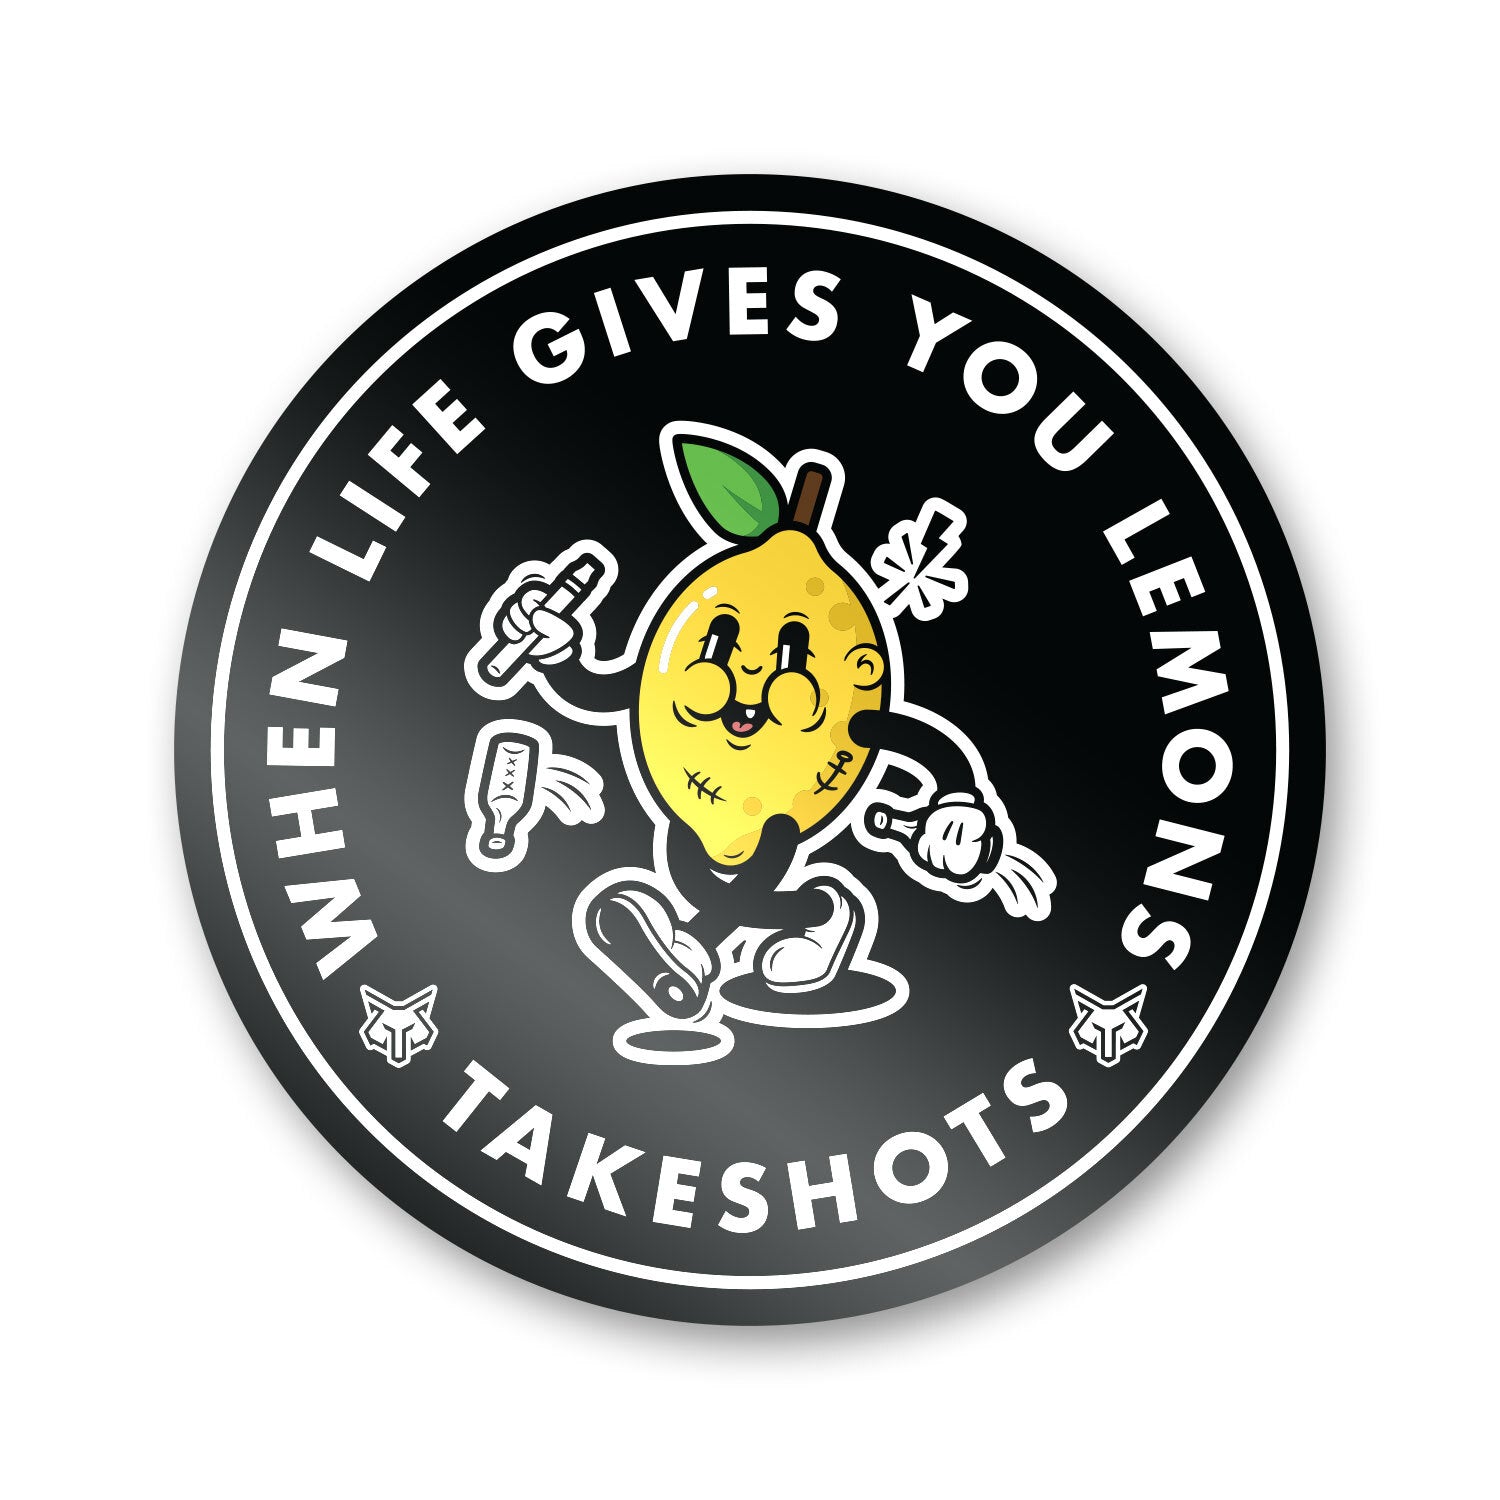 TakeShots in a new way this summer with our patent pending shot